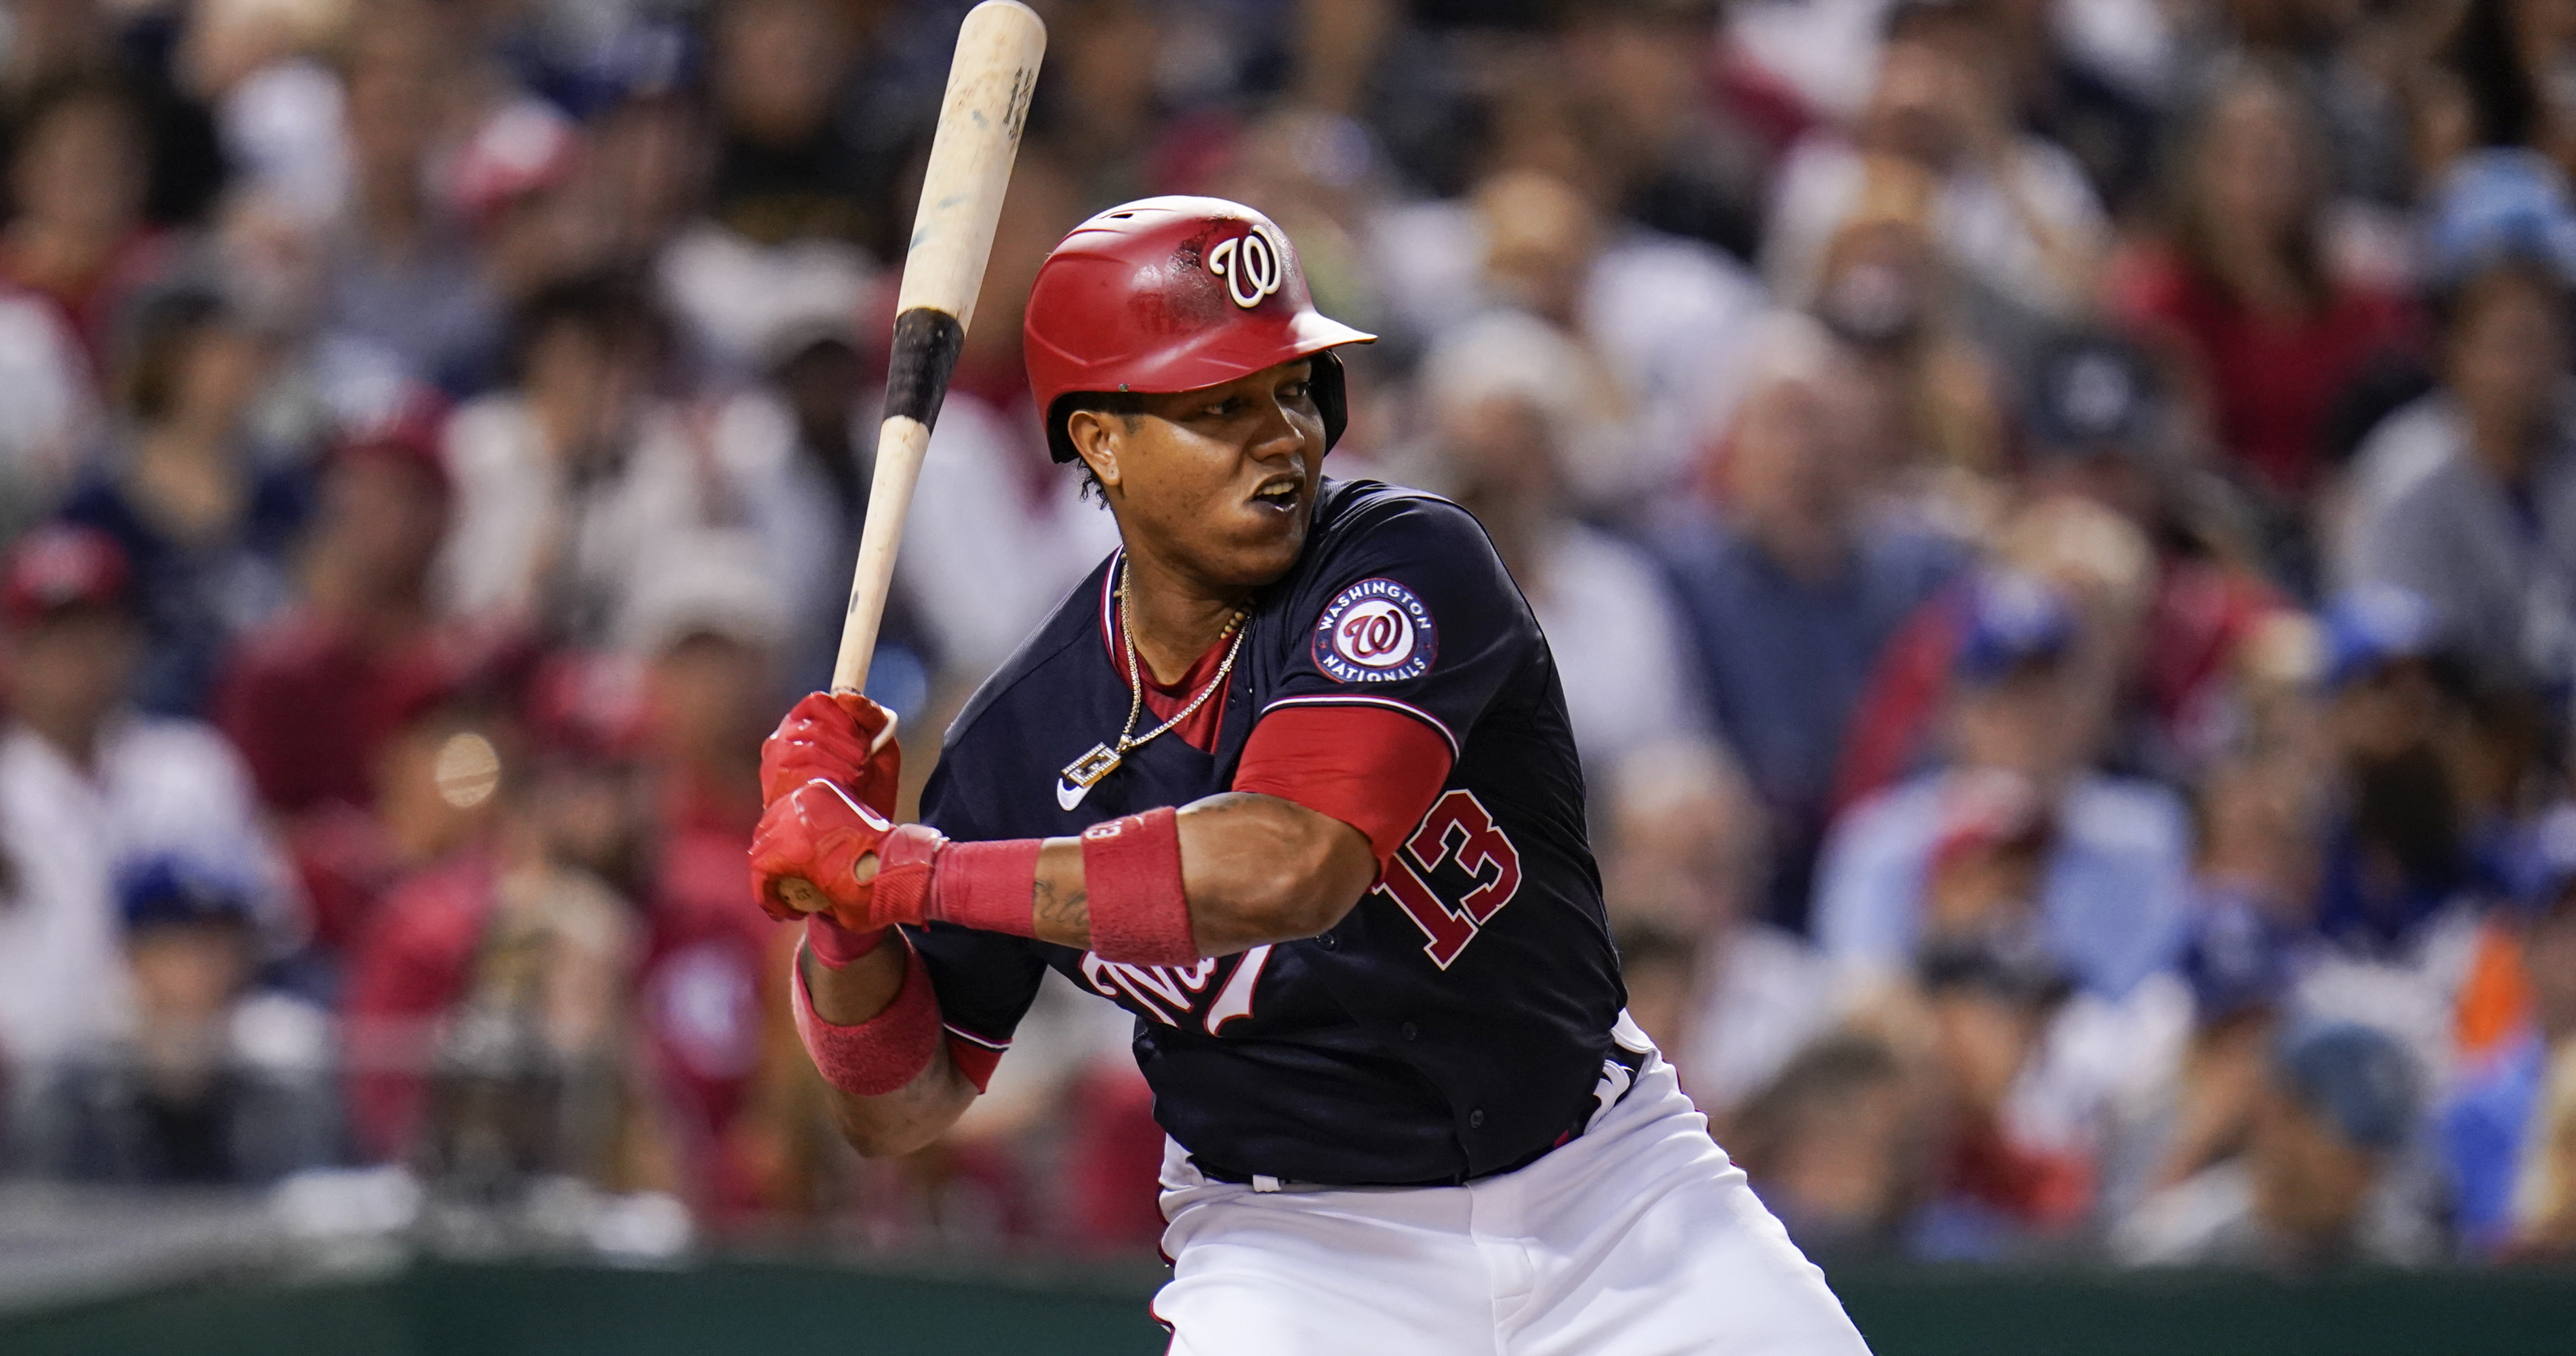 Starlin Castro banned 30 games under MLB policy; Nats to release